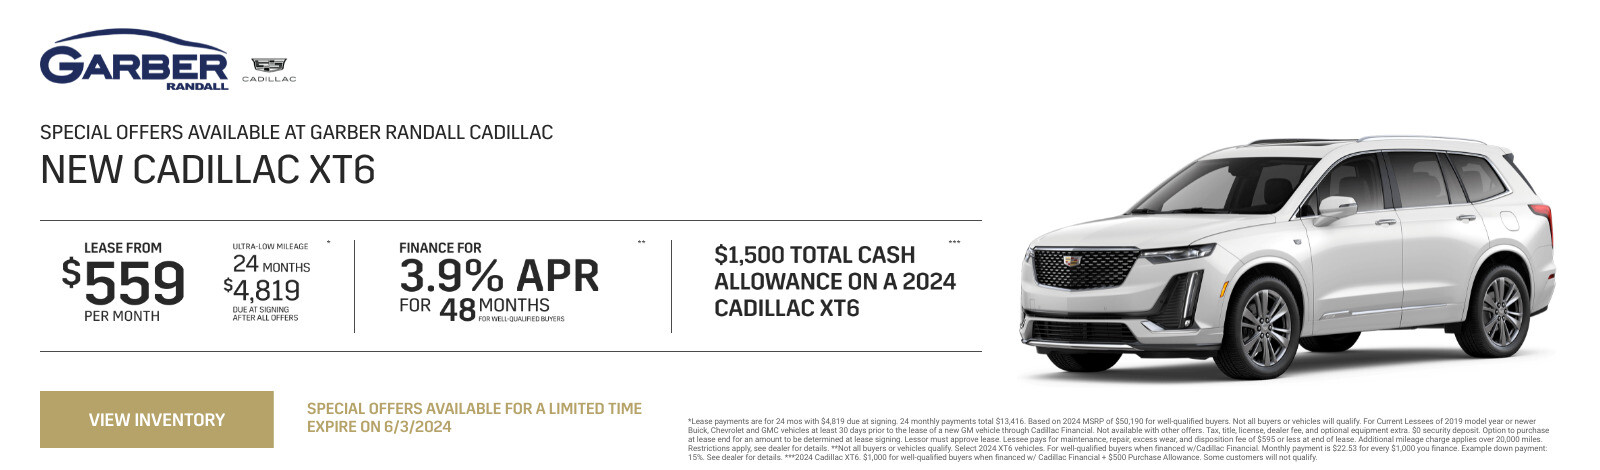 New Cadillac XT6 Current Deals and Offers in Canandaigua, NY